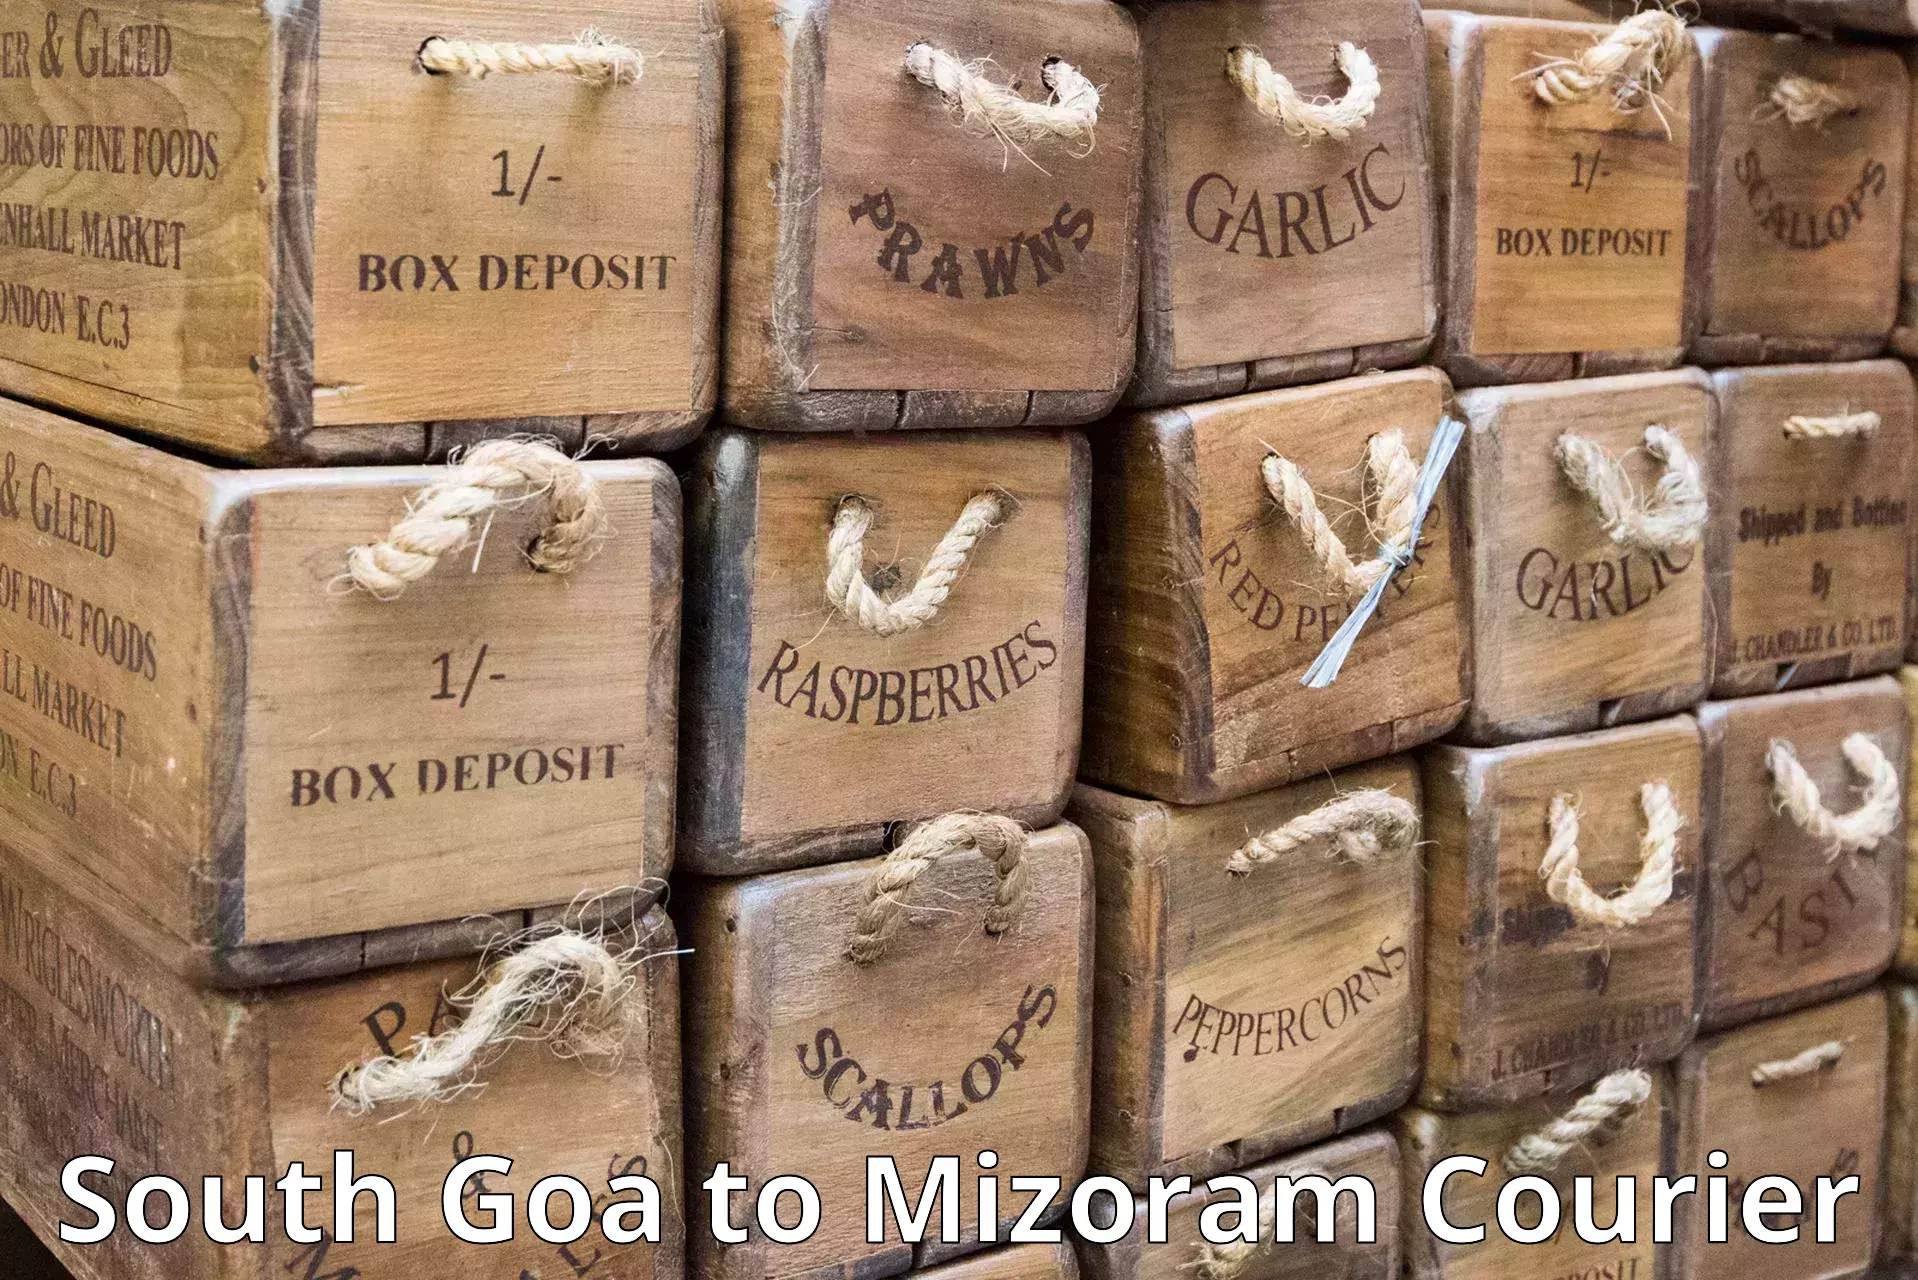 Overnight delivery in South Goa to Mizoram